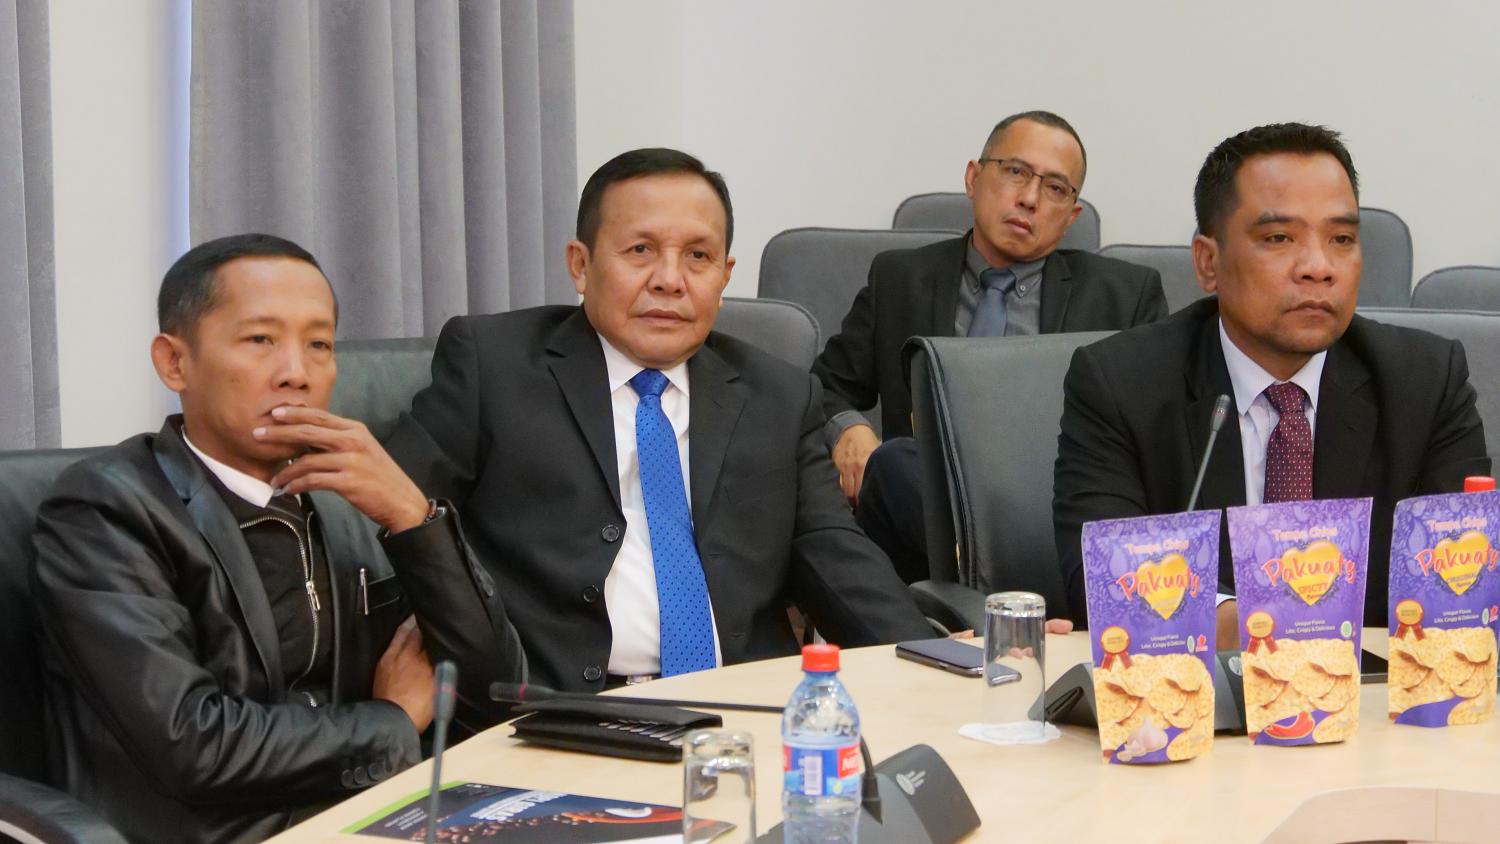 On that date, a delegation from Indonesia visited the Moscow Chamber of Commerce and Industry. The delegation included entrepreneurs from  various businesses of the East Java region.